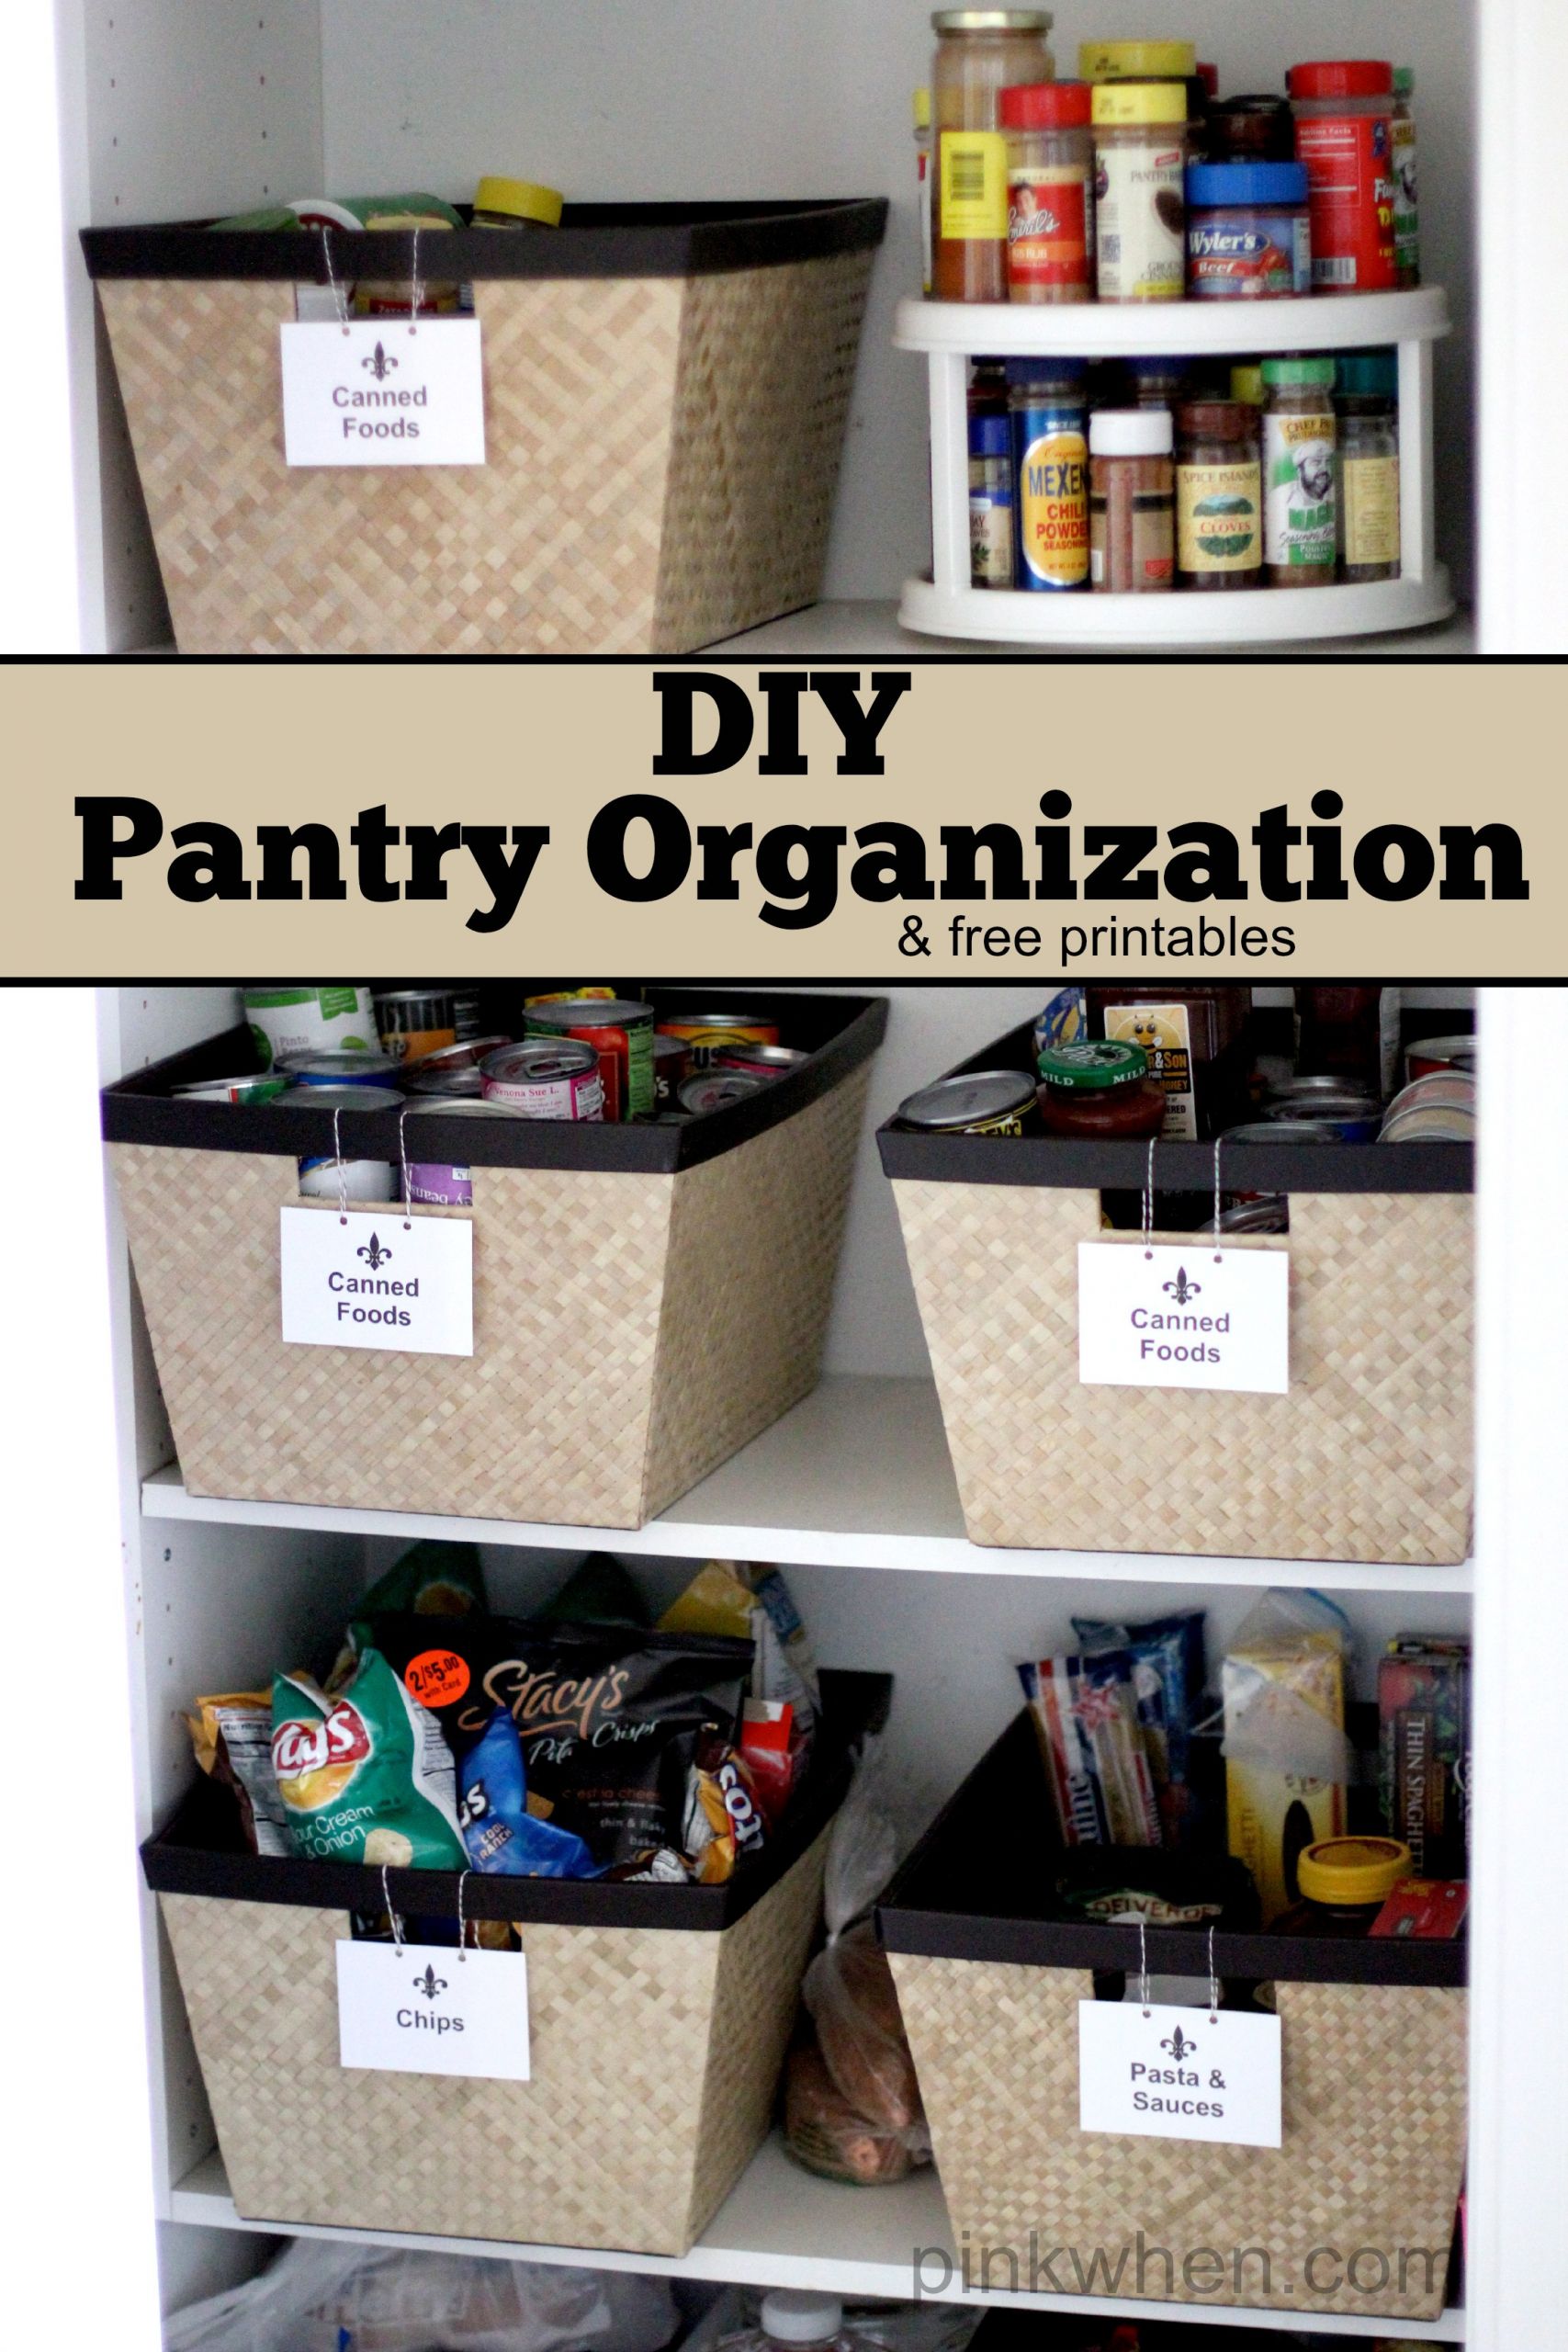 Pantry Can Organizer DIY
 Pantry Organization Page 2 of 2 Blooming Homestead